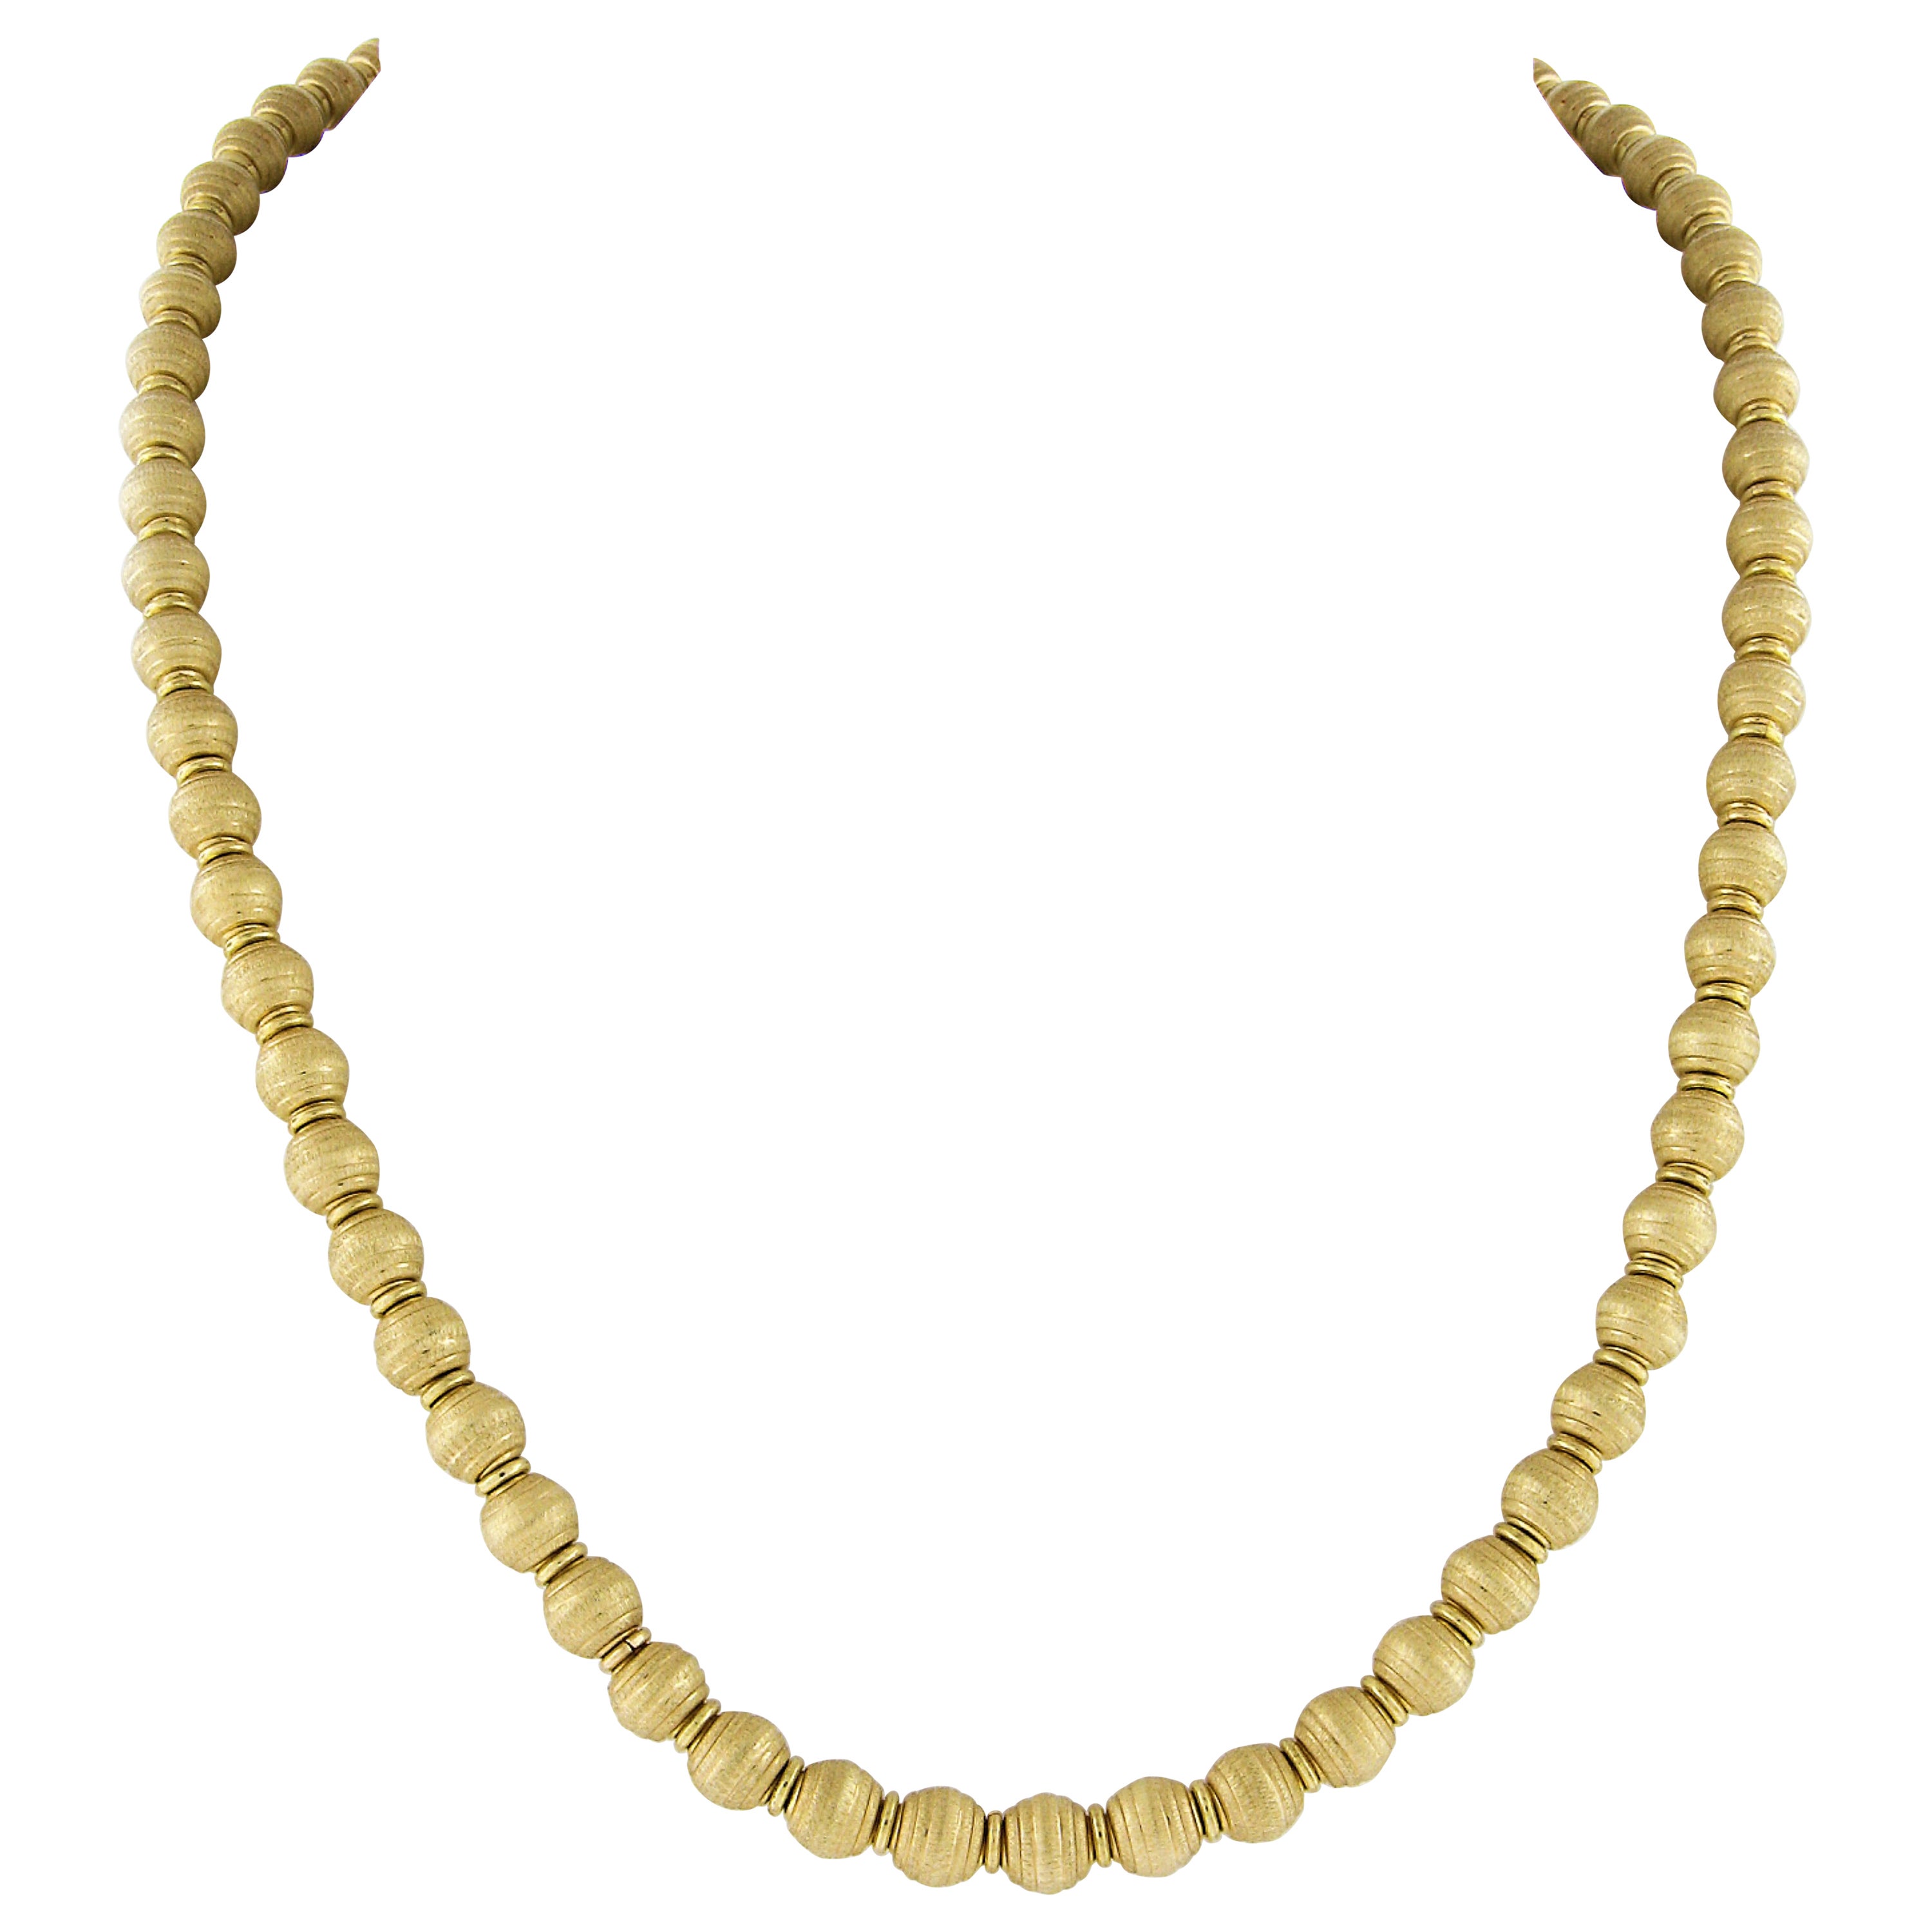 Italian Solid 18k Yellow Gold Brushed Finish Fancy Ball Bead Necklace